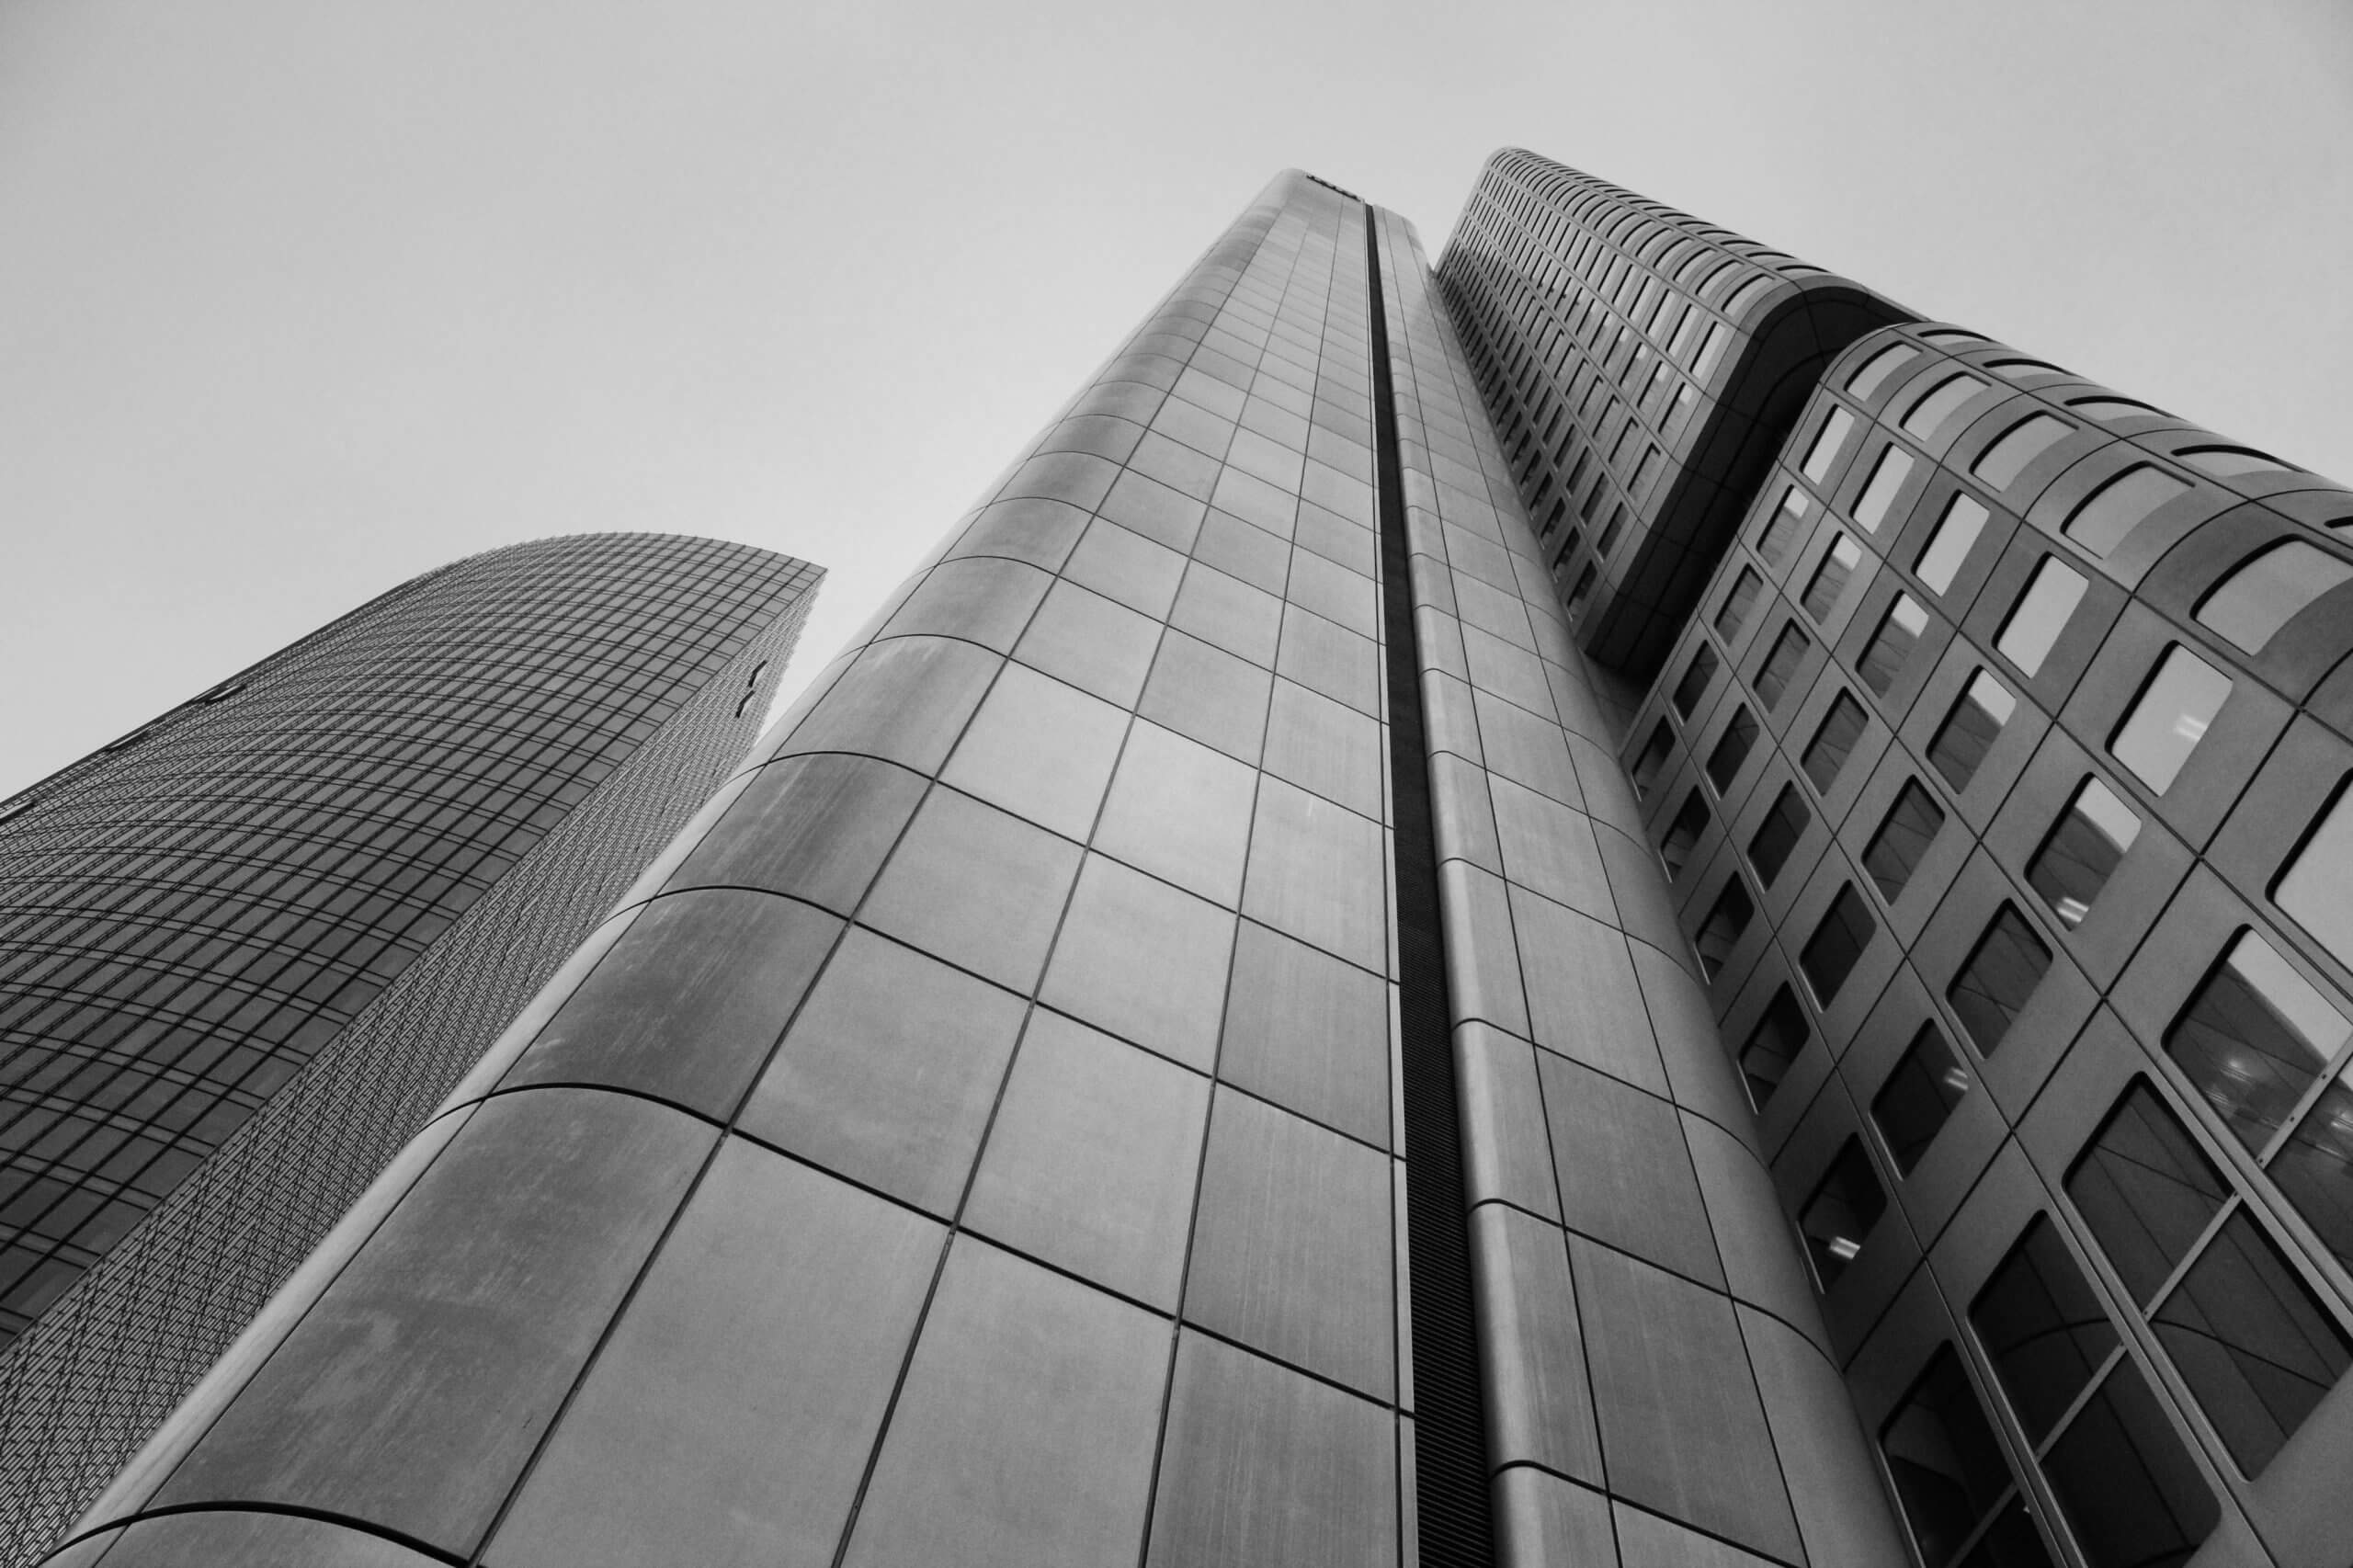 An upwards view at two high-rise buildings on an overcast day